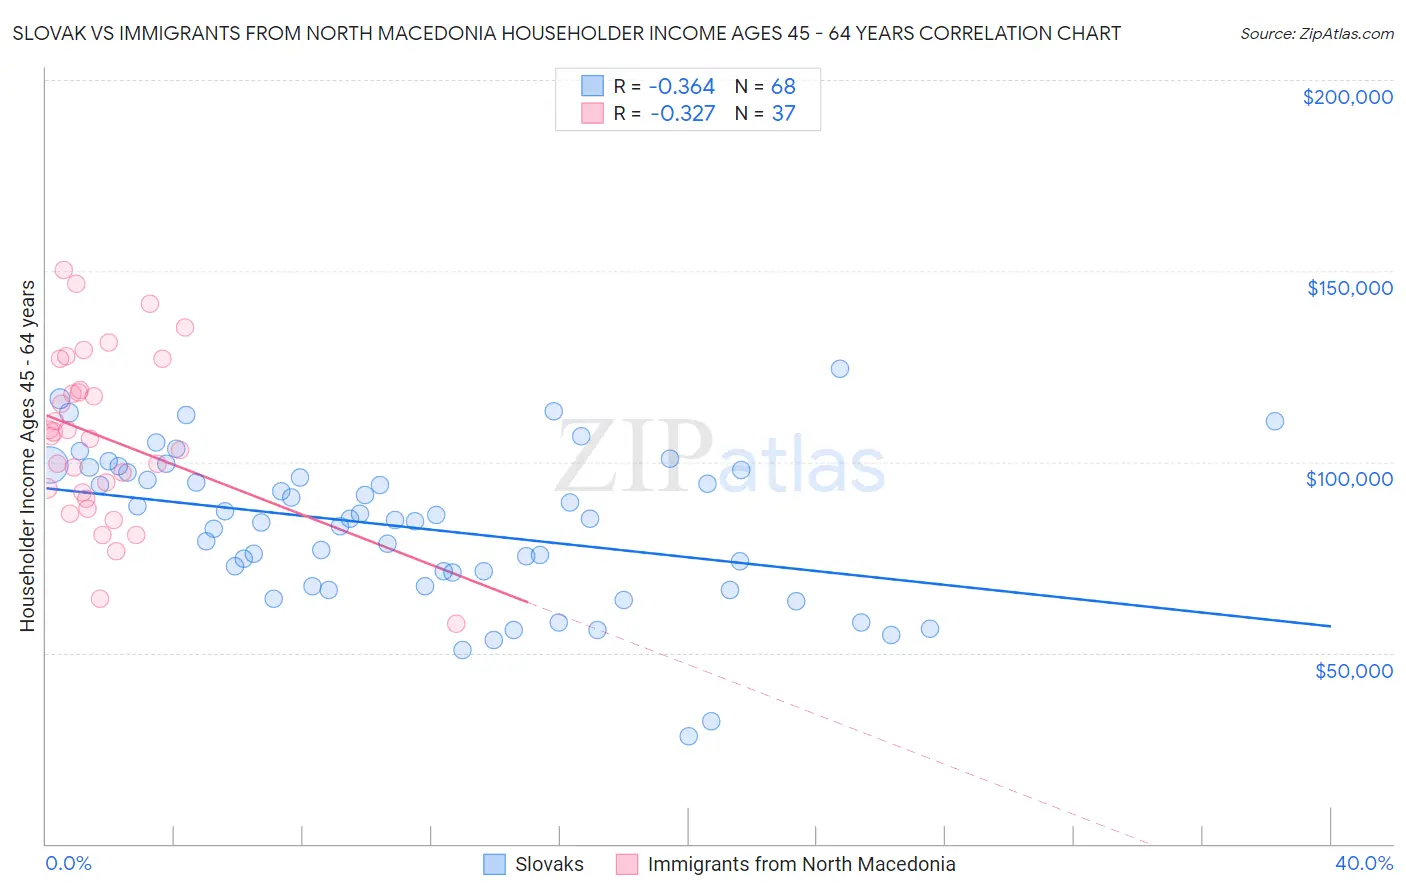 Slovak vs Immigrants from North Macedonia Householder Income Ages 45 - 64 years